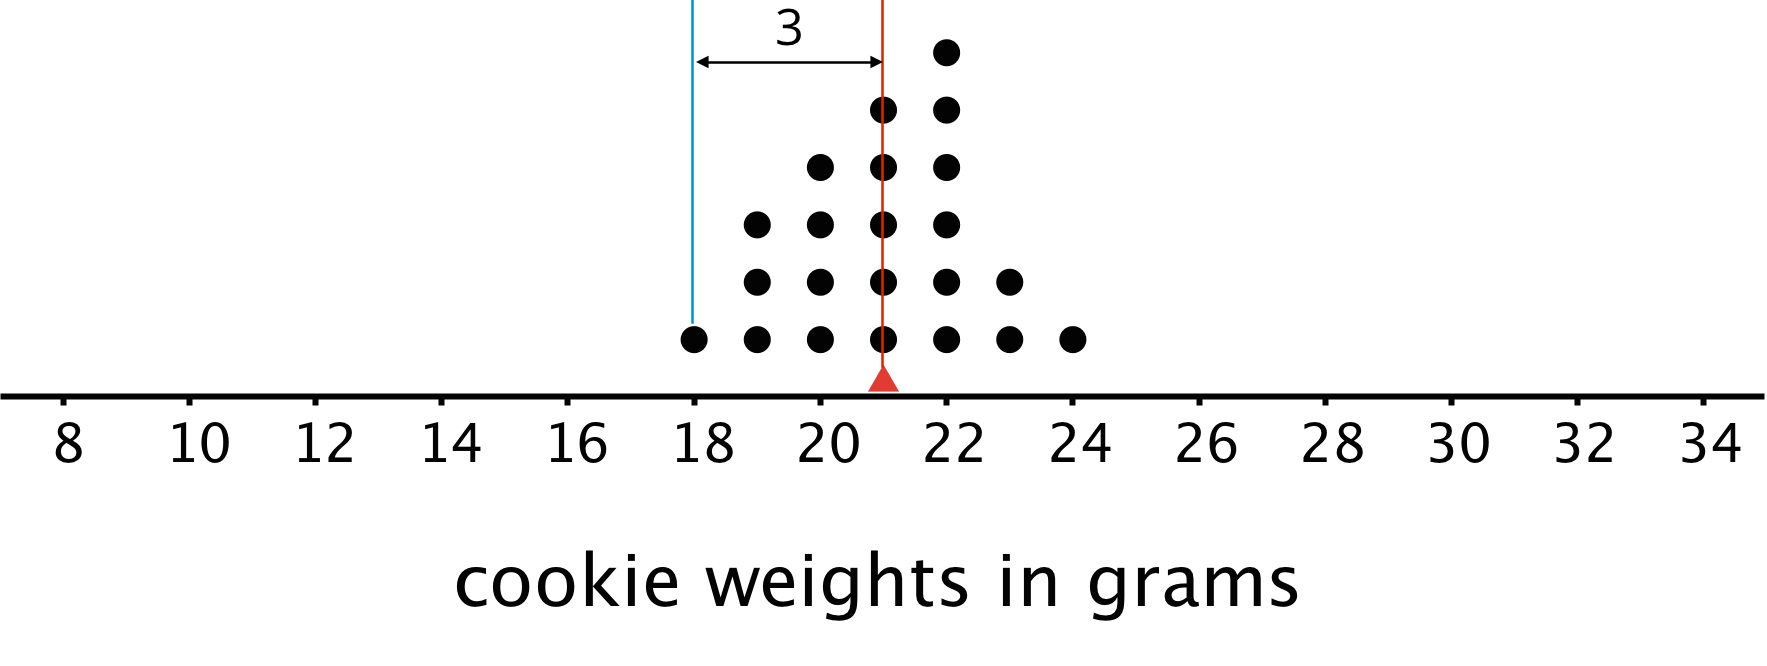 A dot plot for “cookie weights in grams.” The numbers 8 through 34, in increments of 2, are indicated. A triangle is indicated at 21 grams. There are two perpendicular lines drawn, one at 18 grams and the other at 21 grams. A horizontal line between the two lines is labeled 3. The data are as follows: 18 grams, 1 dot; 19 grams, 3 dots; 20 grams, 4 dots; 21 grams, 5 dots; 22 grams, 6 dots; 23 grams, 2 dots, 24 grams, 1 dot.